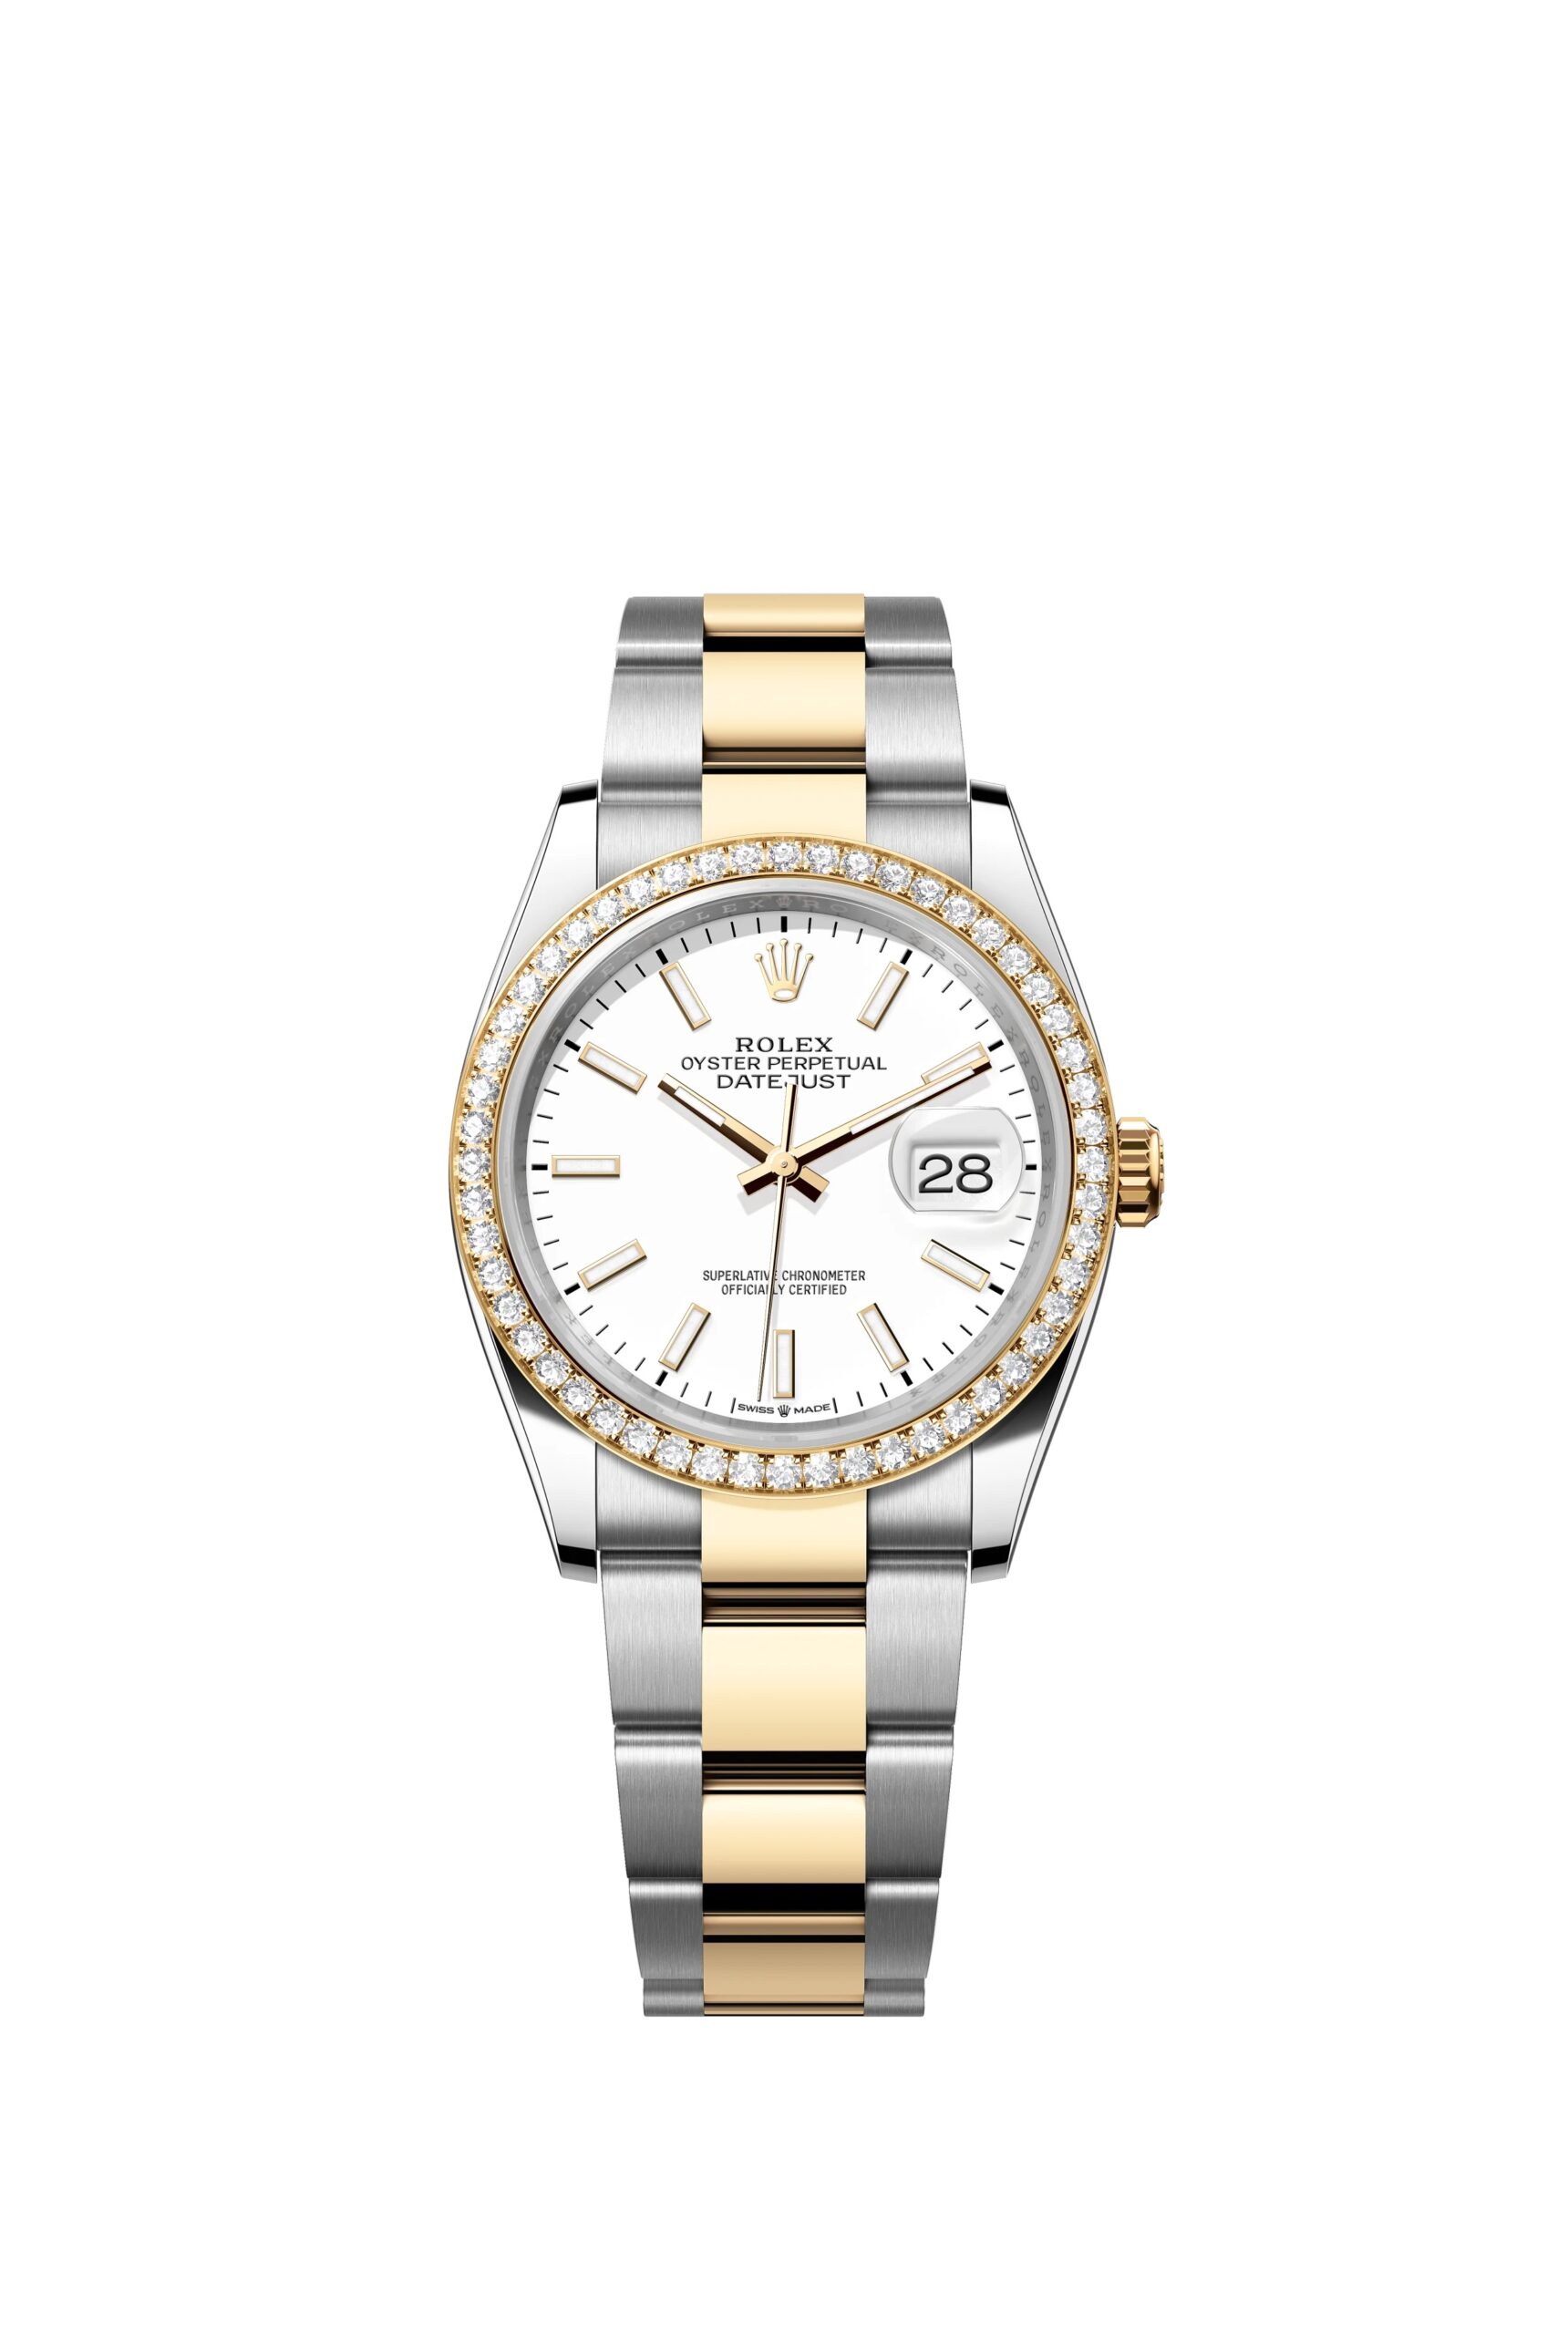 Rolex Datejust 36 Oyster, 36 mm, Oystersteel, yellow gold and diamonds Reference 126283RBR